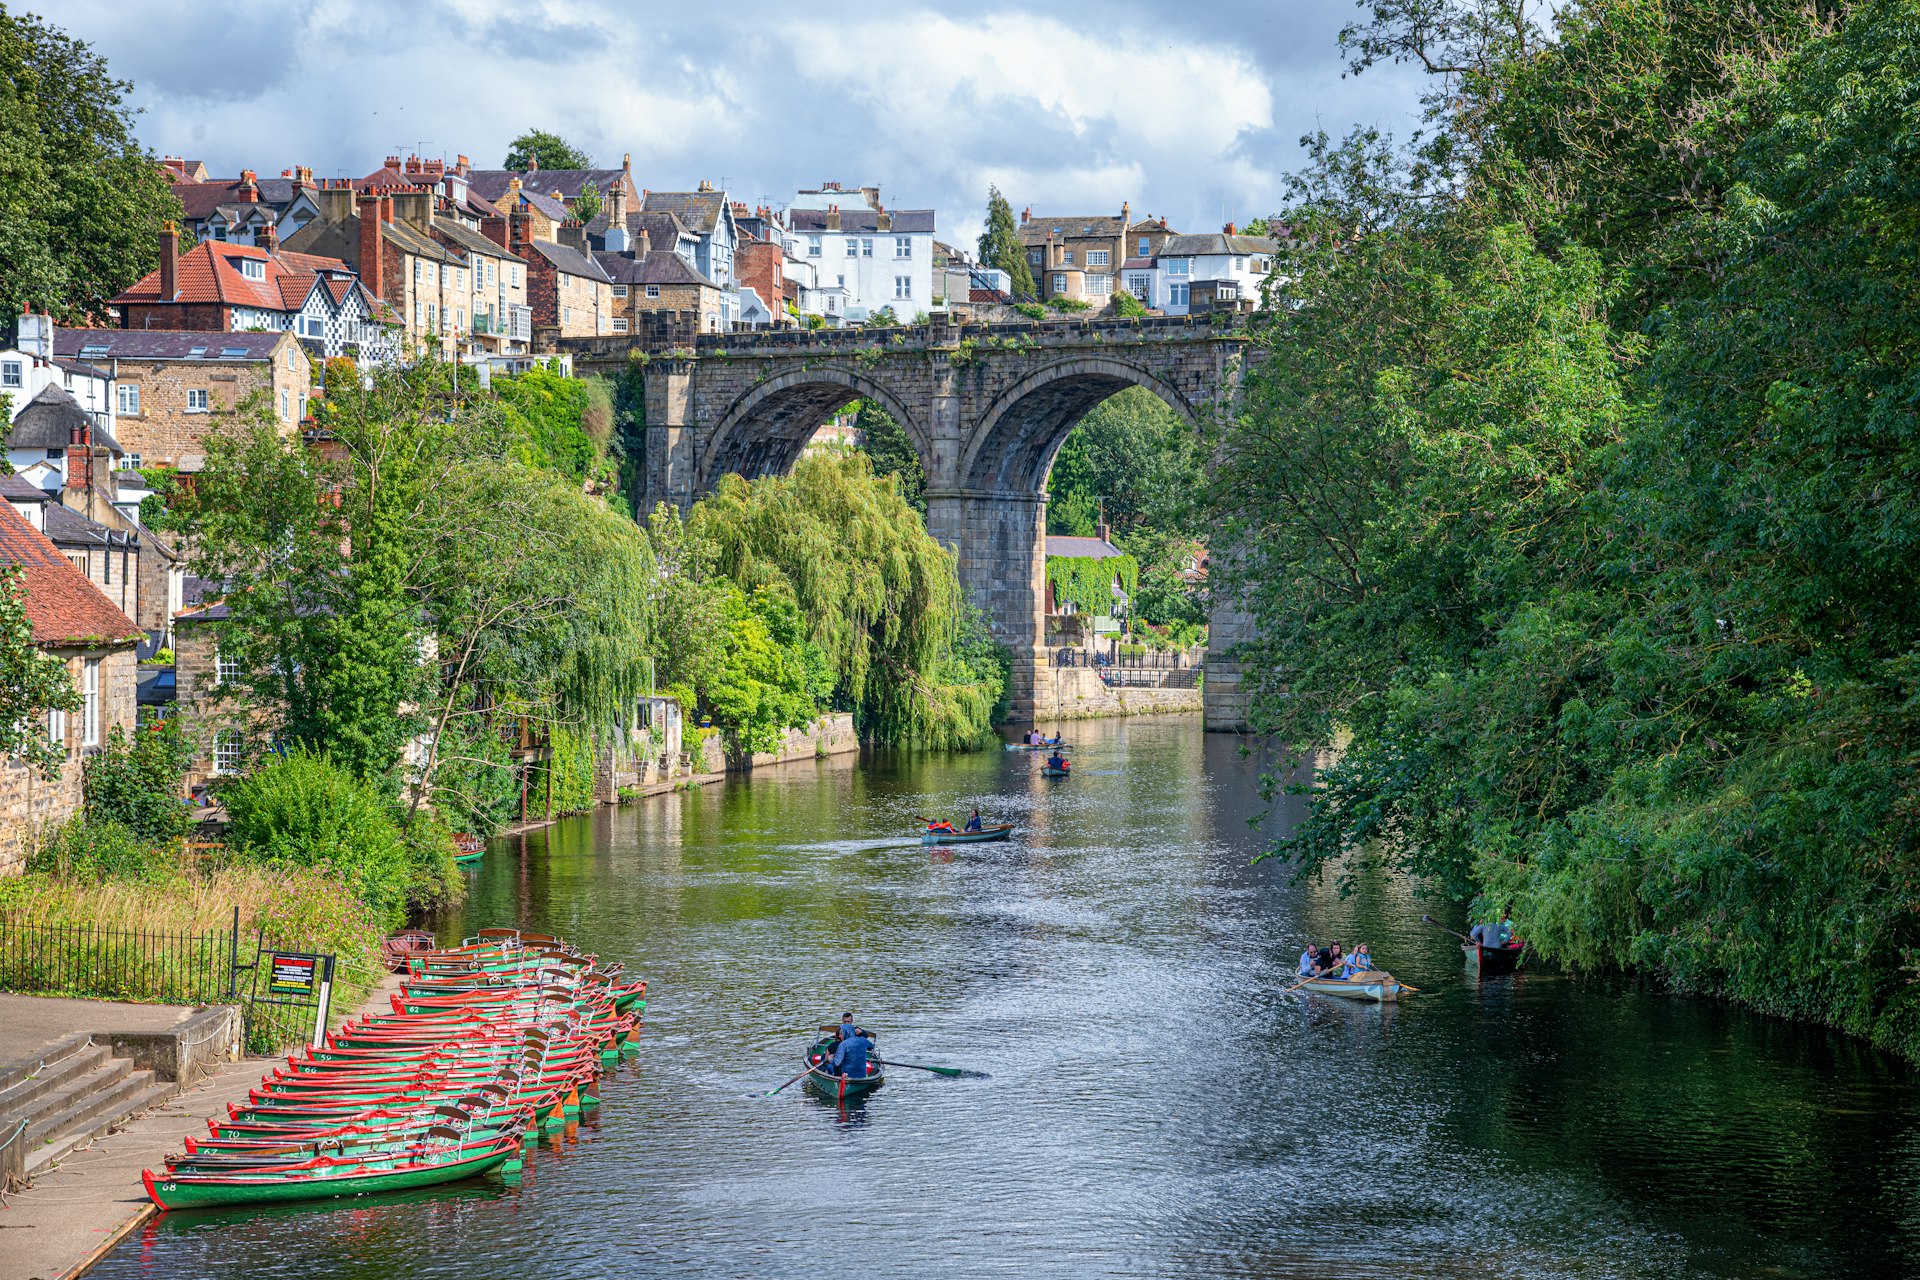 Rowing boats on the River Nidd in Knaresborough, with the famous railway train viaduct in the background